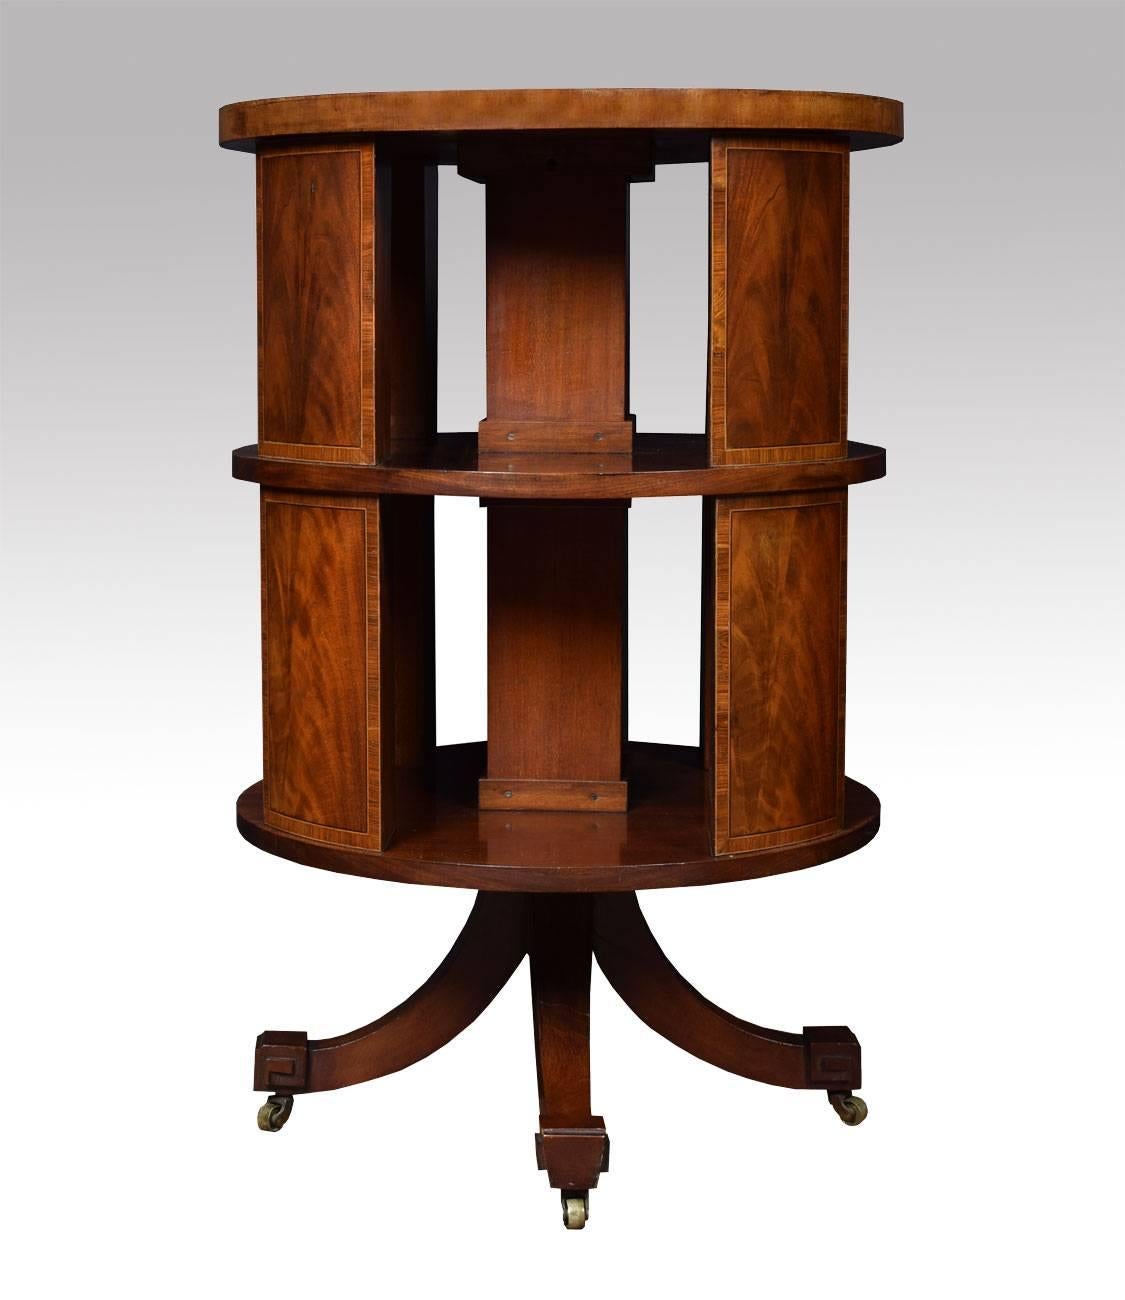 

Edwardian circular revolving bookcase the flame mahogany top with kingwood banded edge above an arrangement of shelves supported on  flame mahogany inlaid panels all raised up on cruciform base with original brass castors

Dimensions

Height